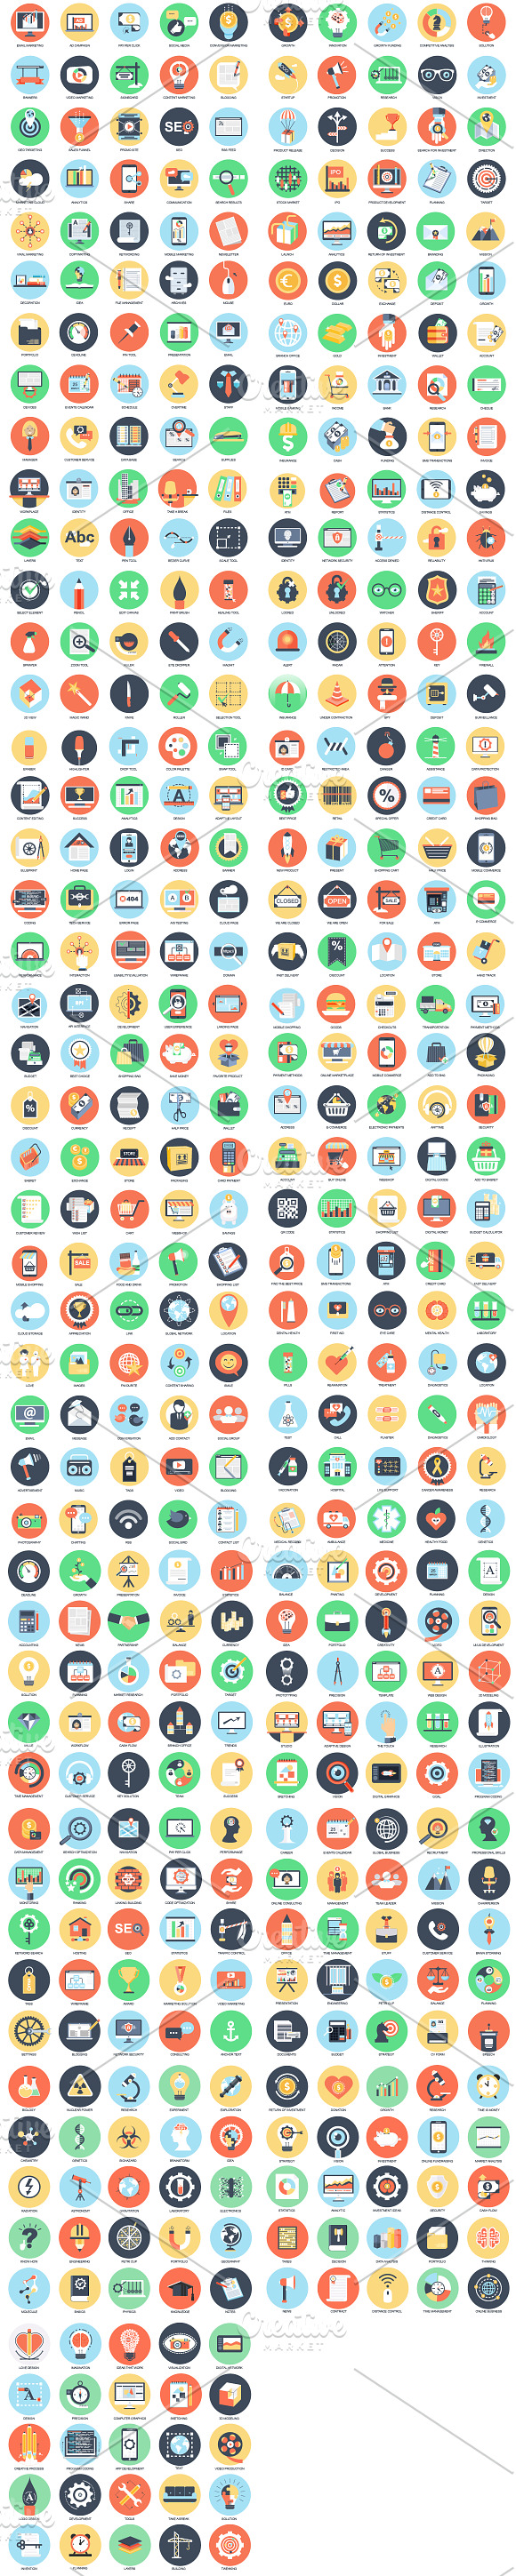 6000+ Flat Icons Bundle in Icons - product preview 6